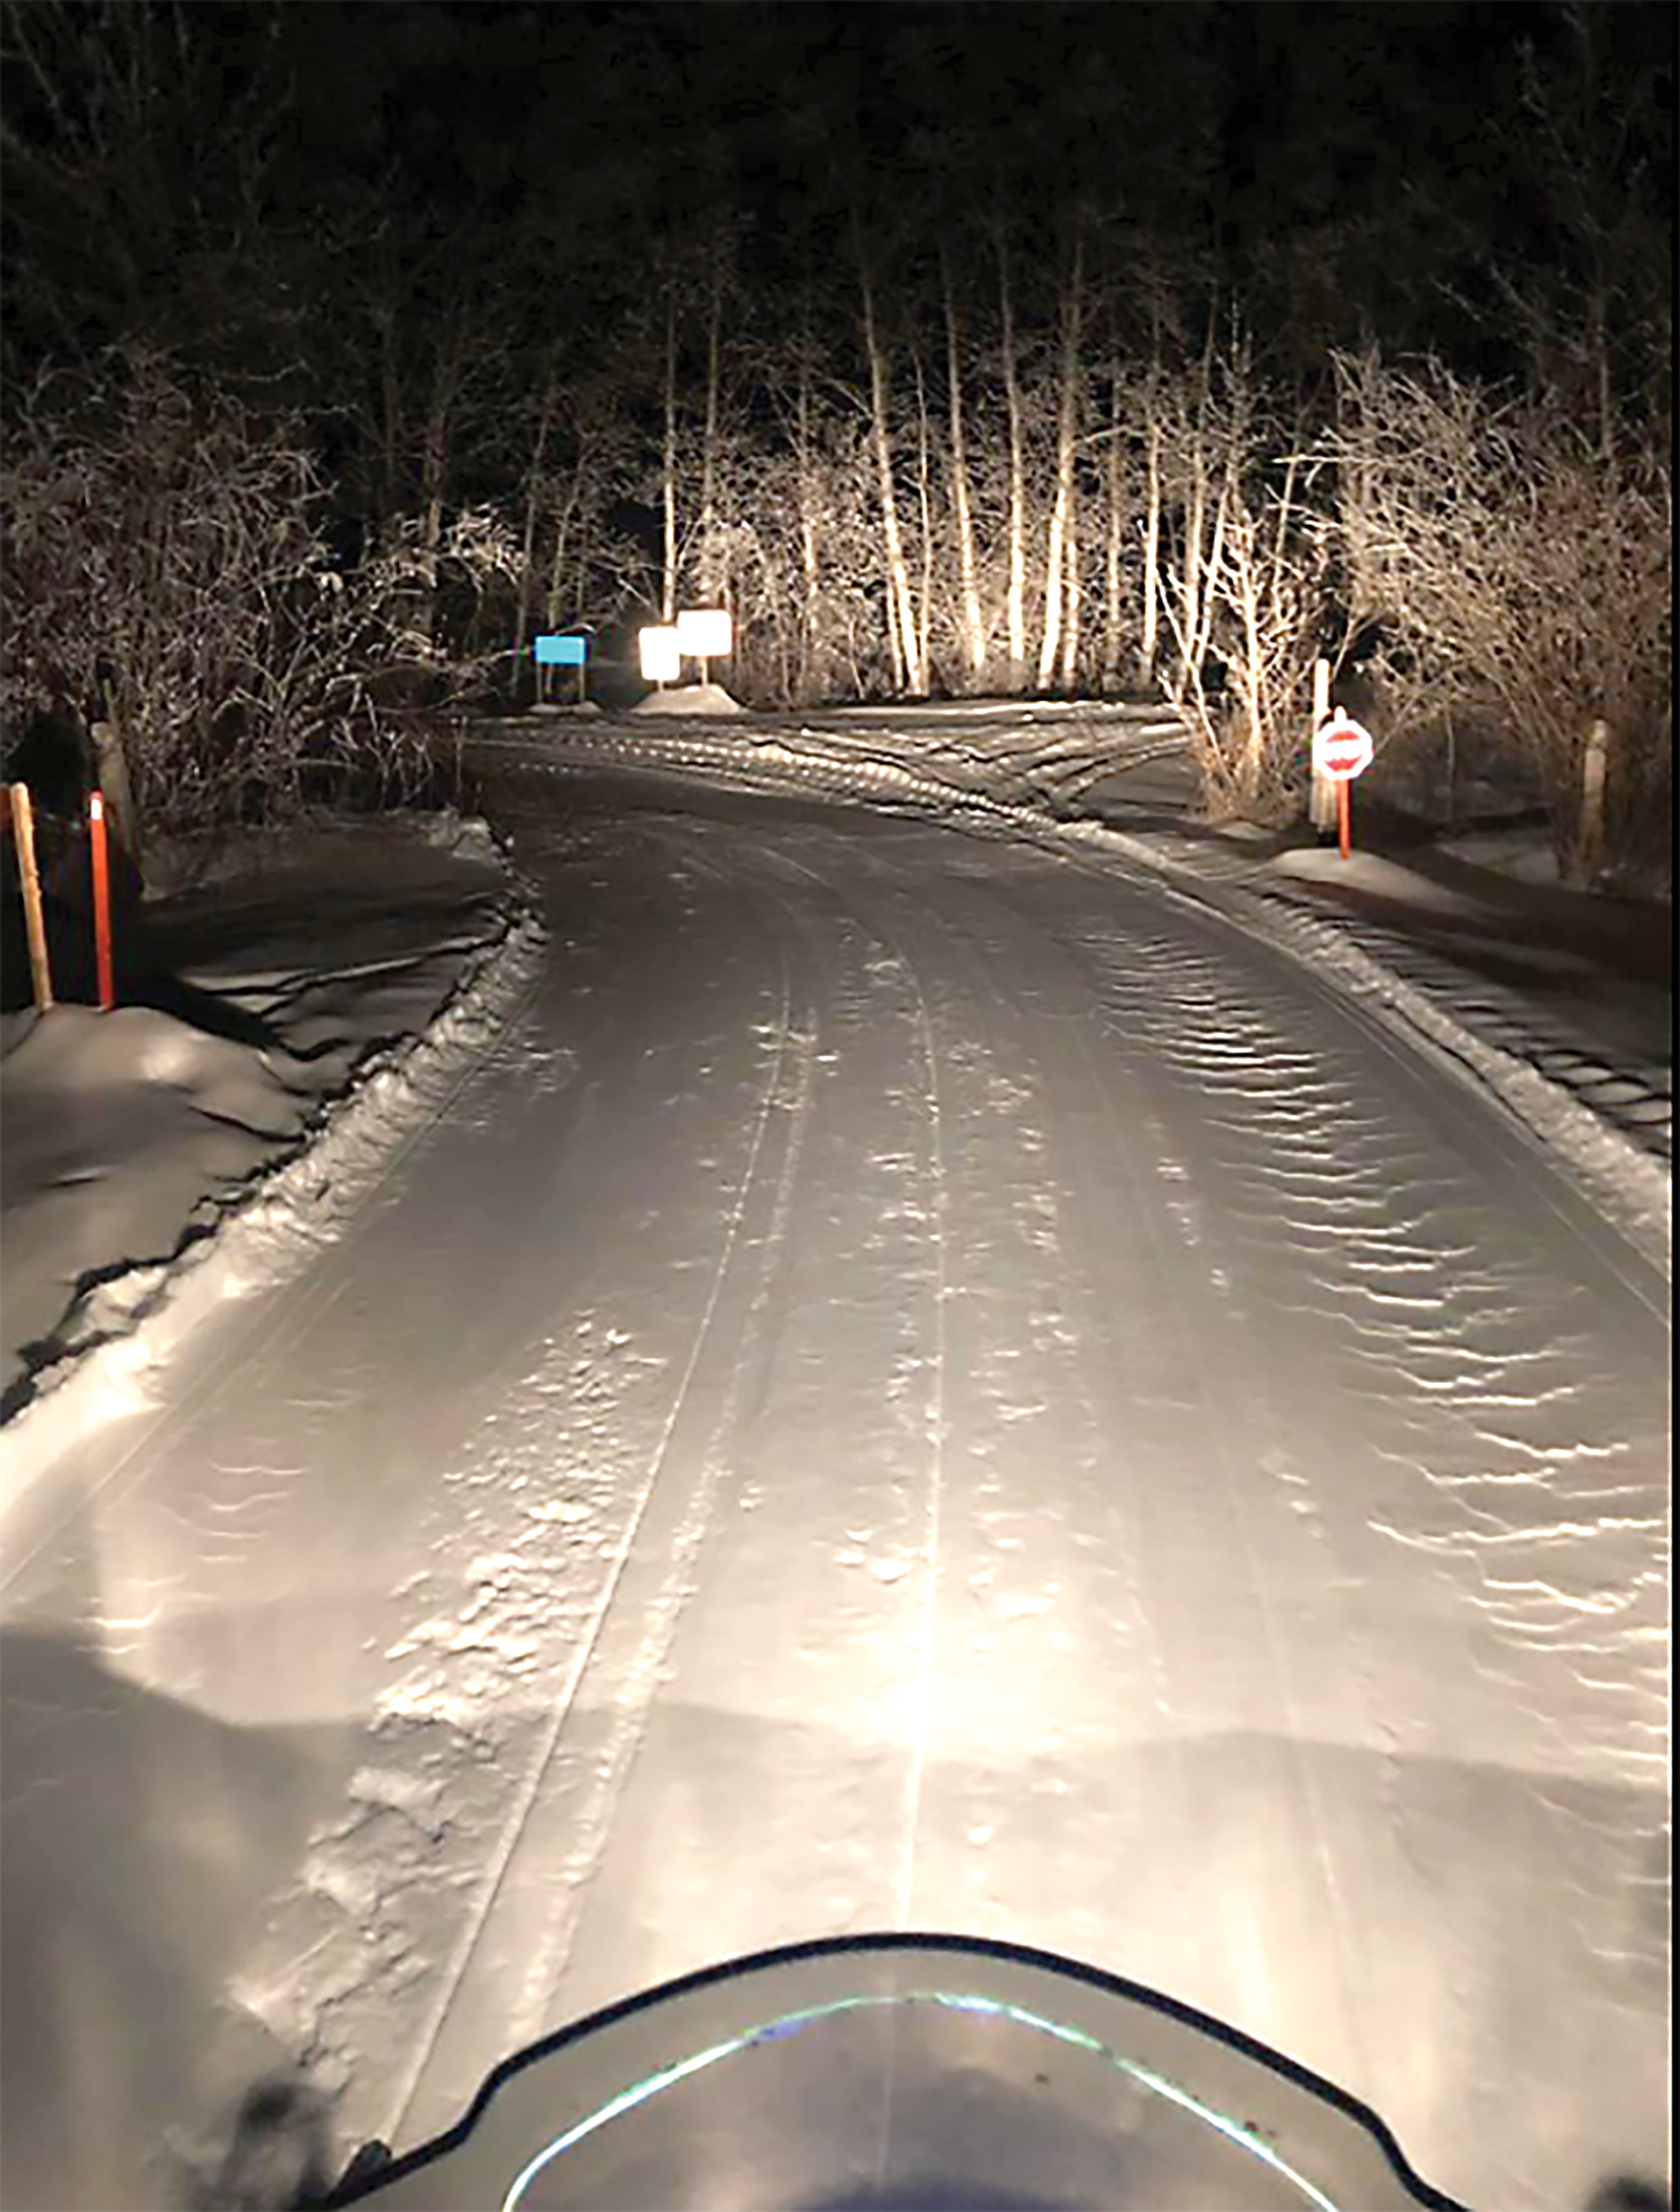 Snowmobiling the Tri Valley Trails at night. Photo by Stan Langley.